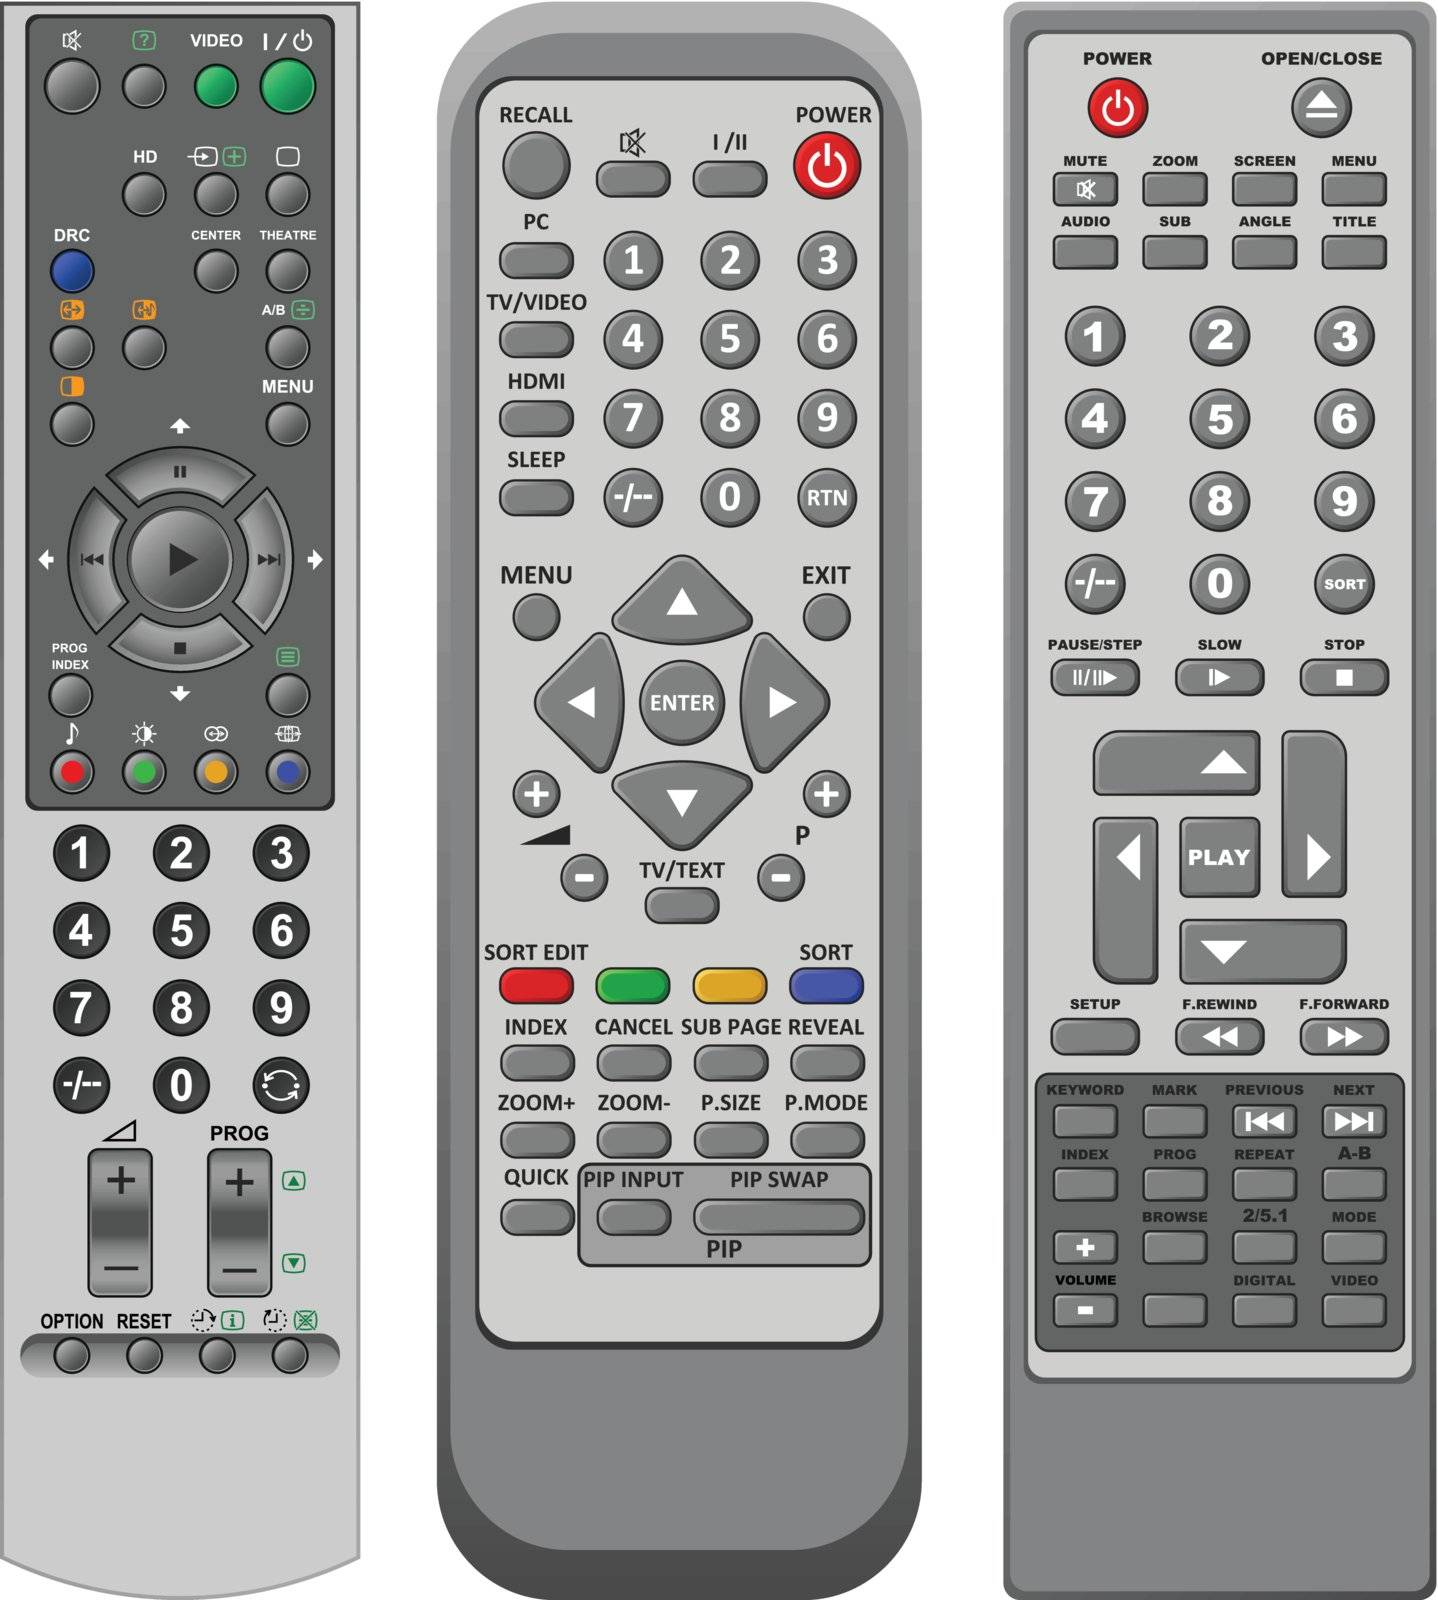 Layered vector illustration of Remote Control.